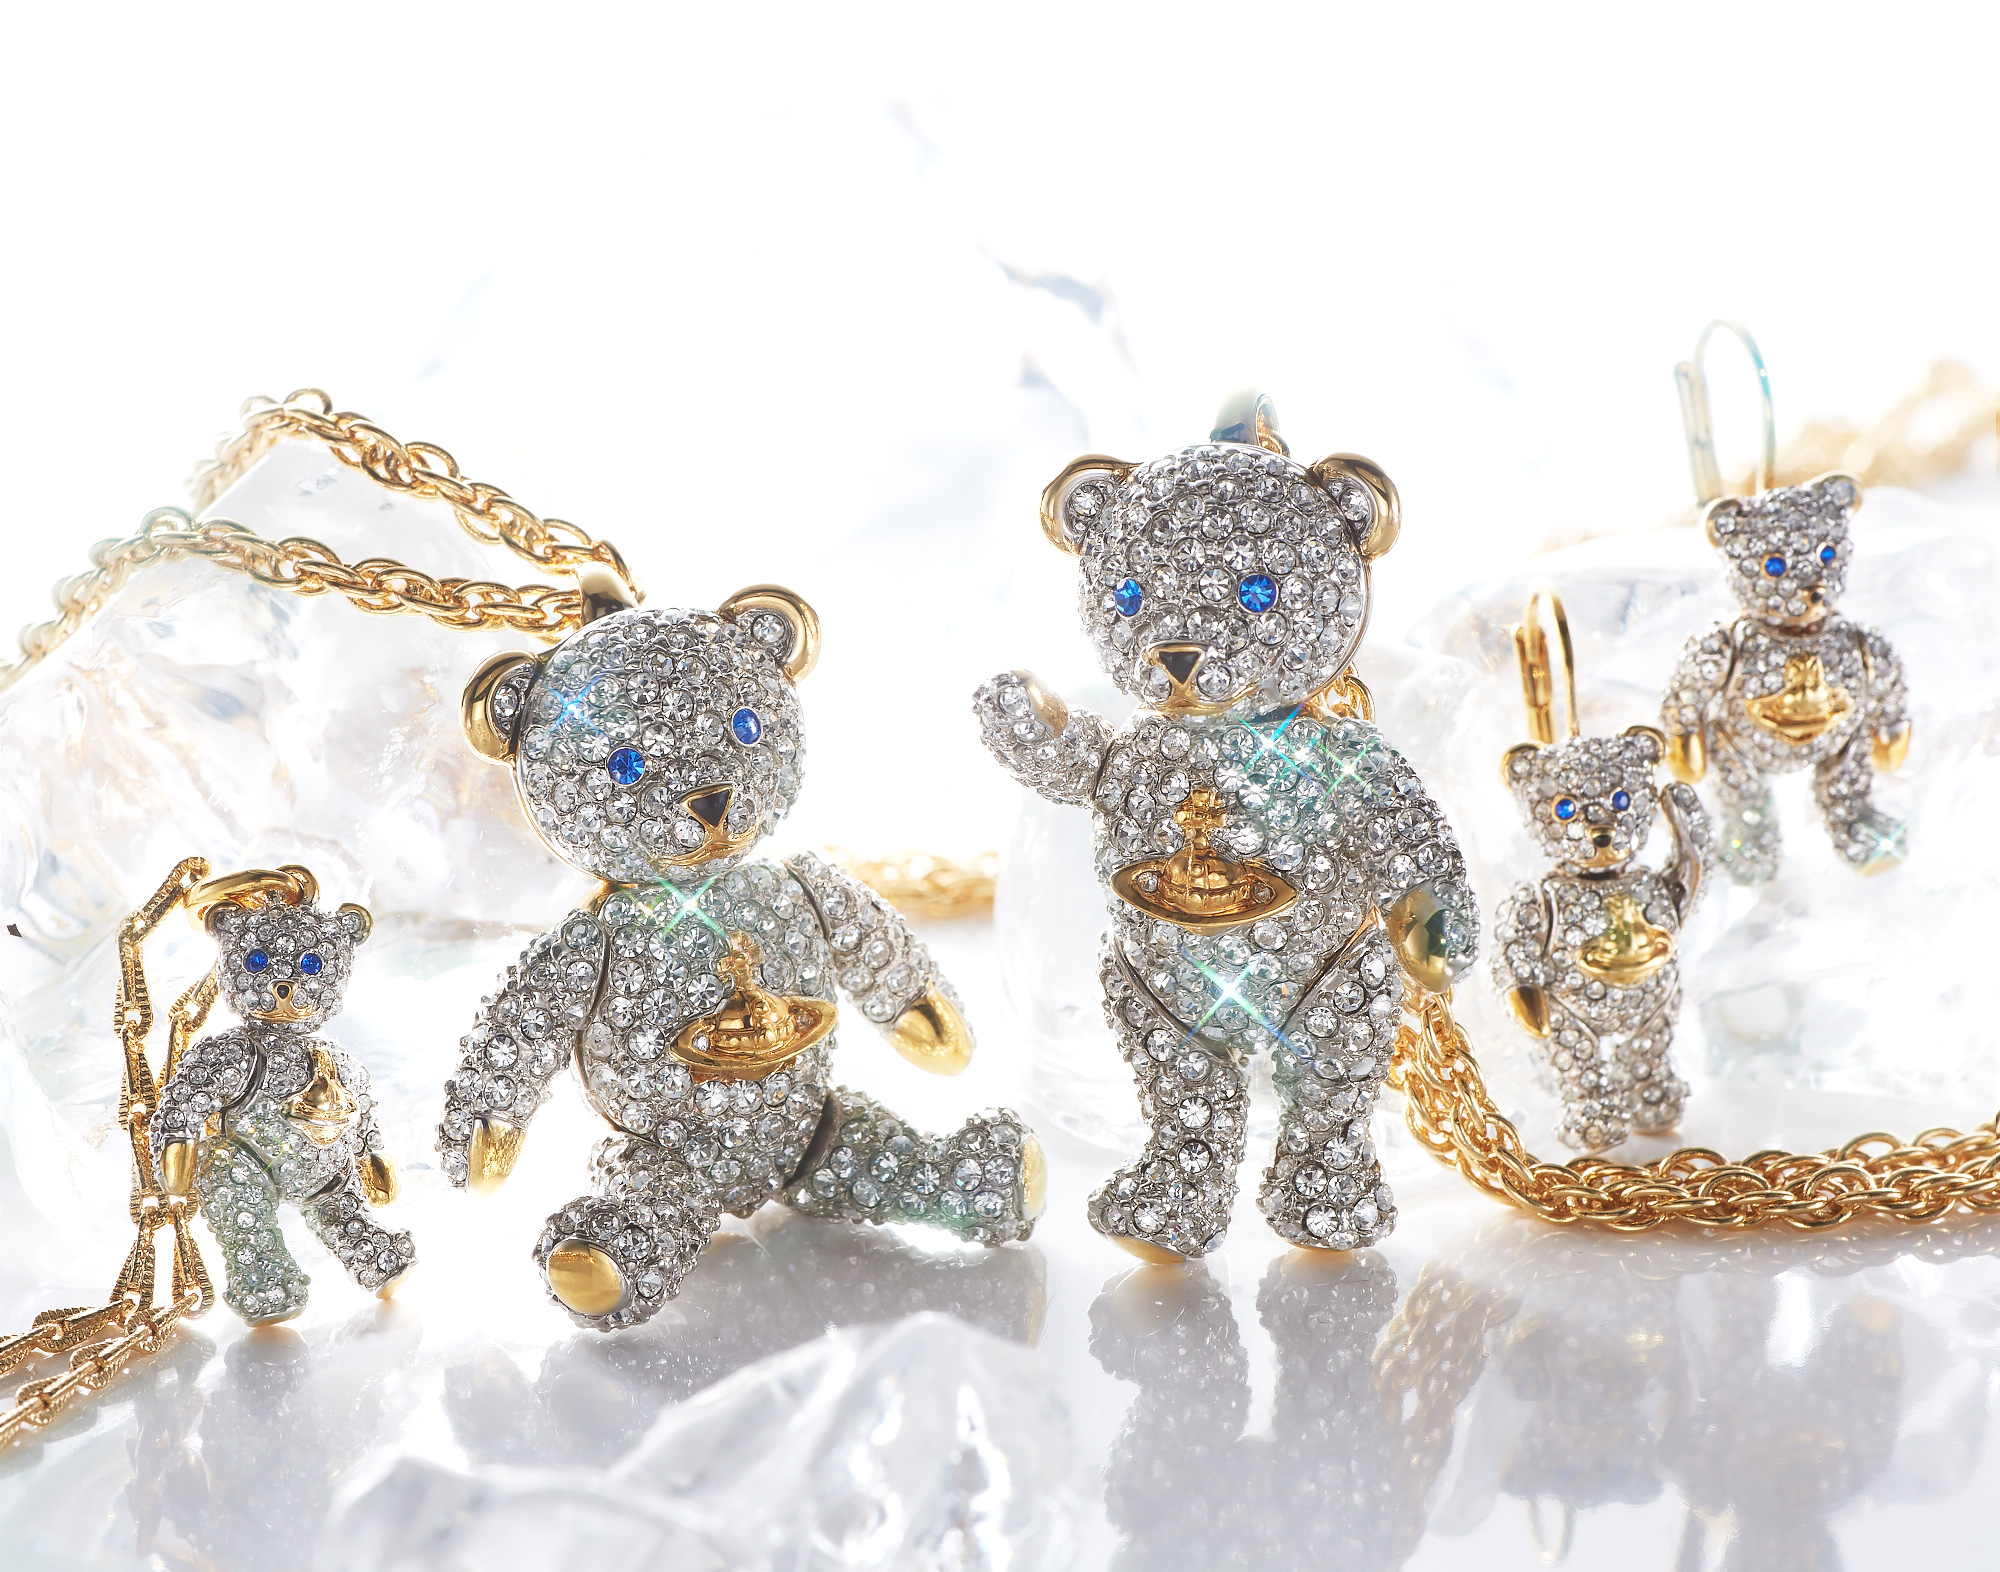 EXCLUSIVE PAVE JEWELRY SERIES “TEDDY” 1.8(Sat) New Arrival｜【公式 